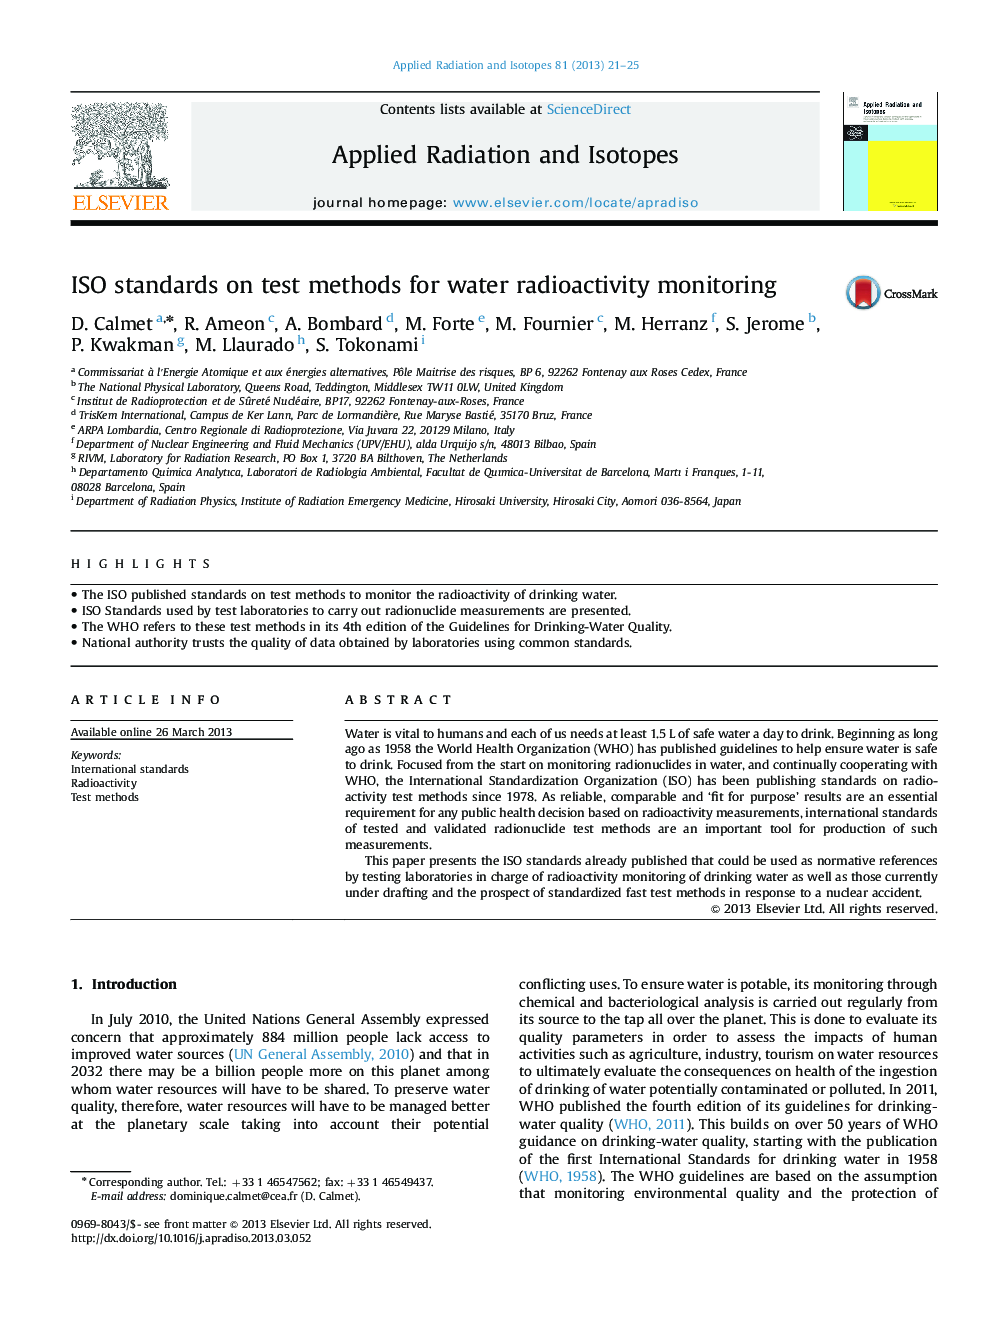 ISO standards on test methods for water radioactivity monitoring